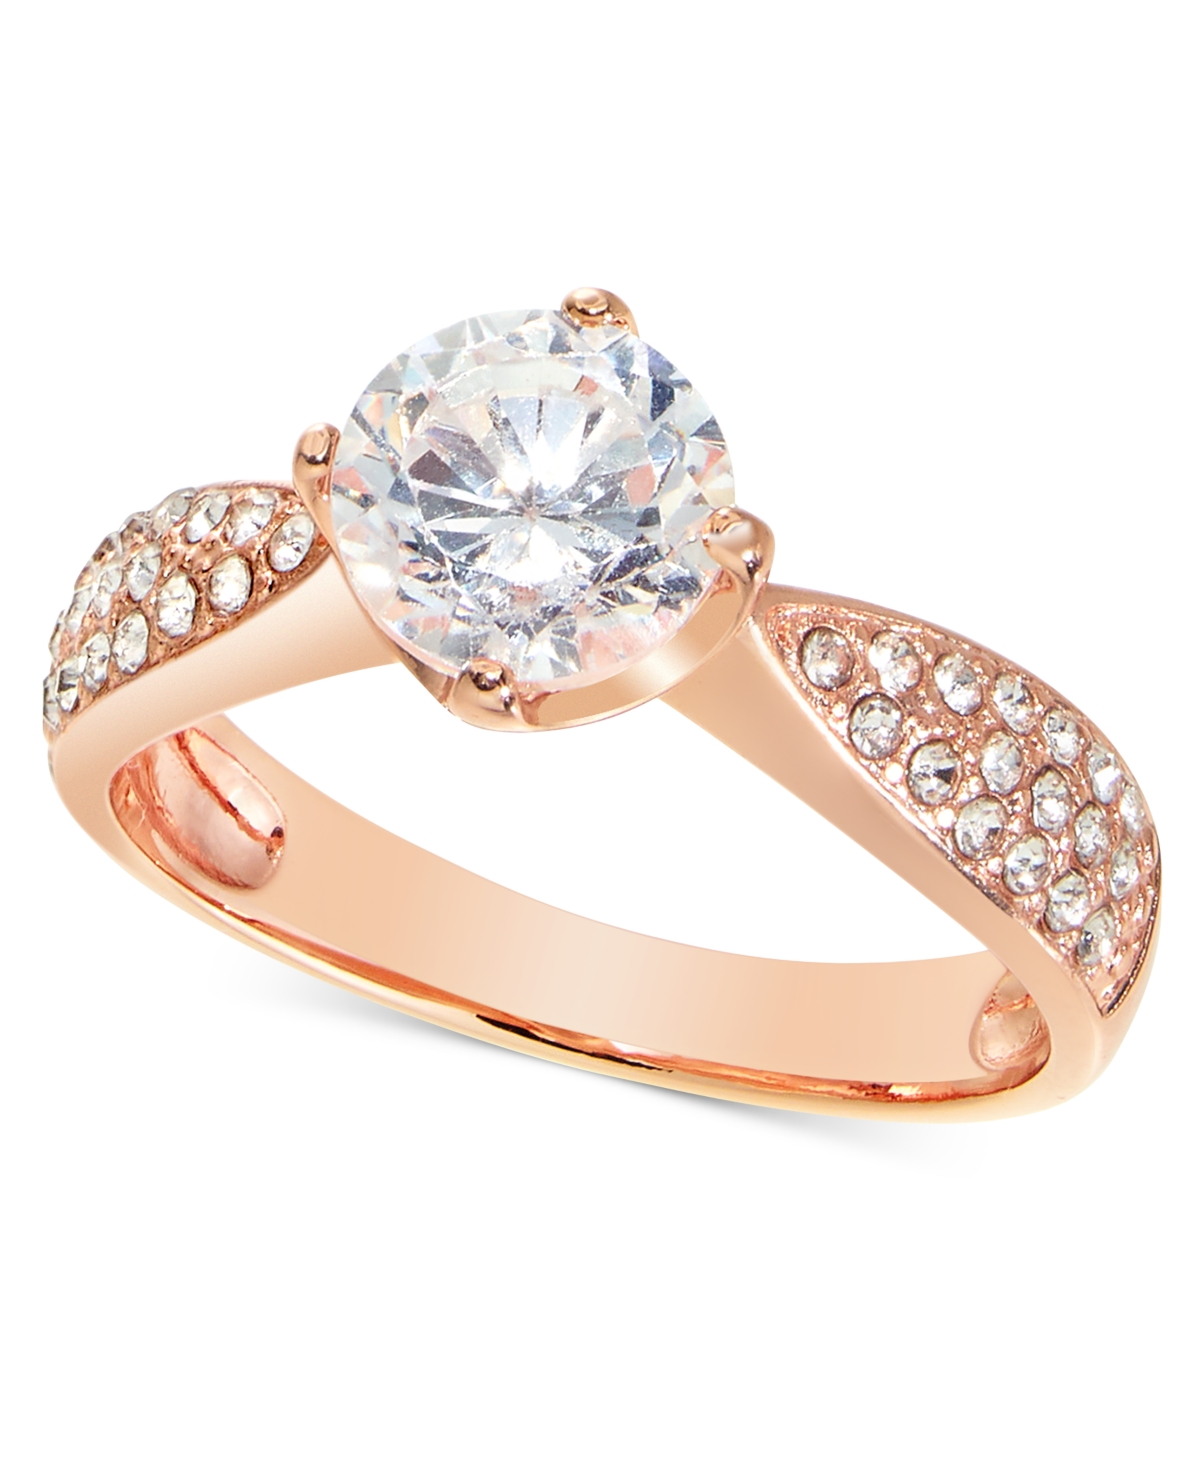 Rose Gold-Tone Pave & Cubic Zirconia Engagement Ring, Created for Macy's - Rose Gold